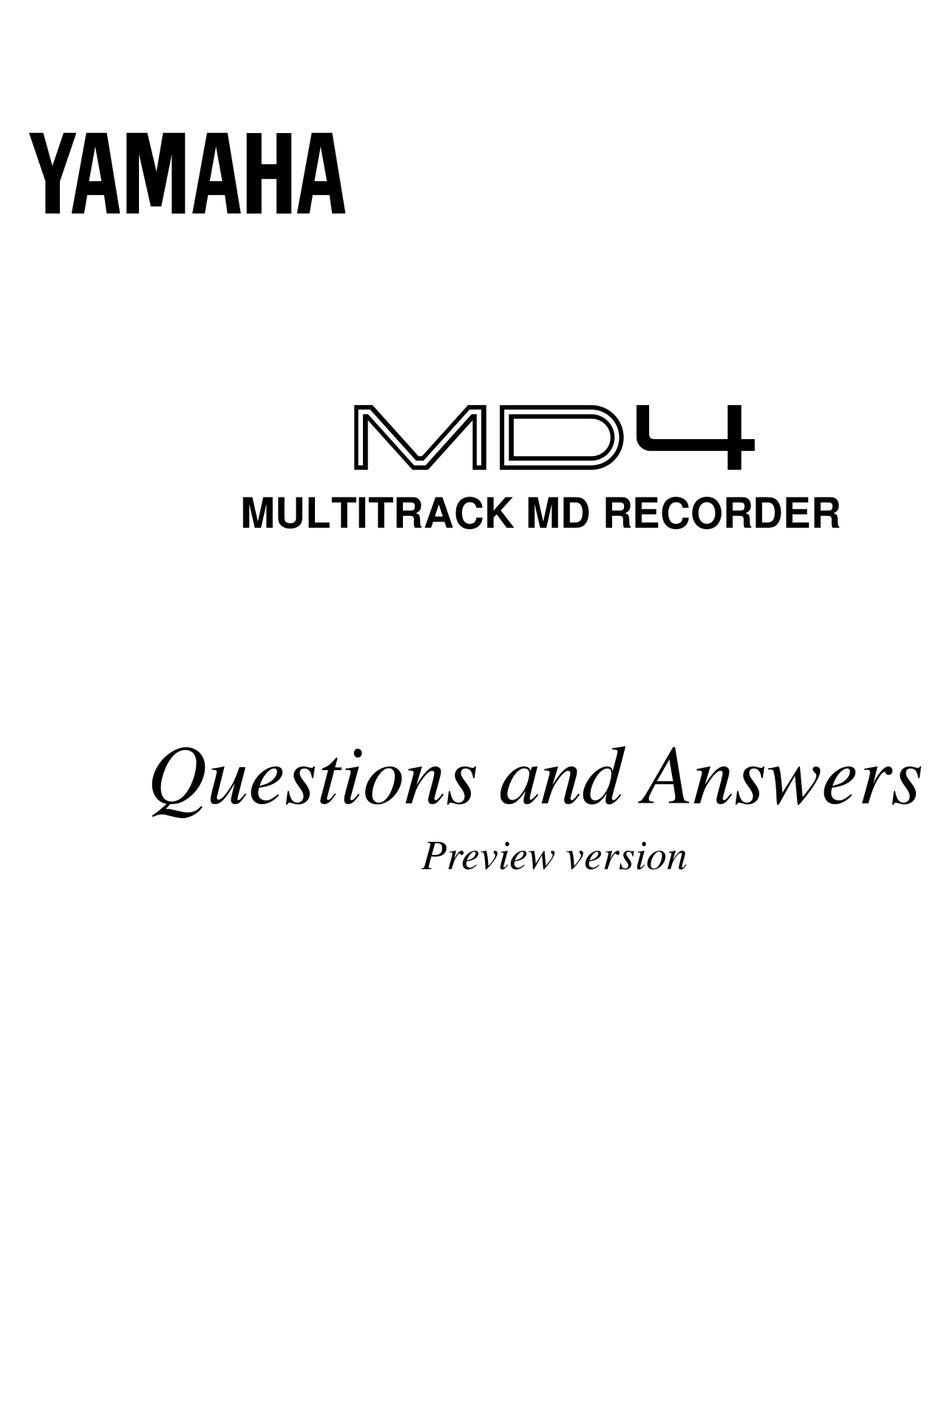 YAMAHA MD4 FREQUENTLY ASKED QUESTIONS MANUAL Pdf Download | ManualsLib